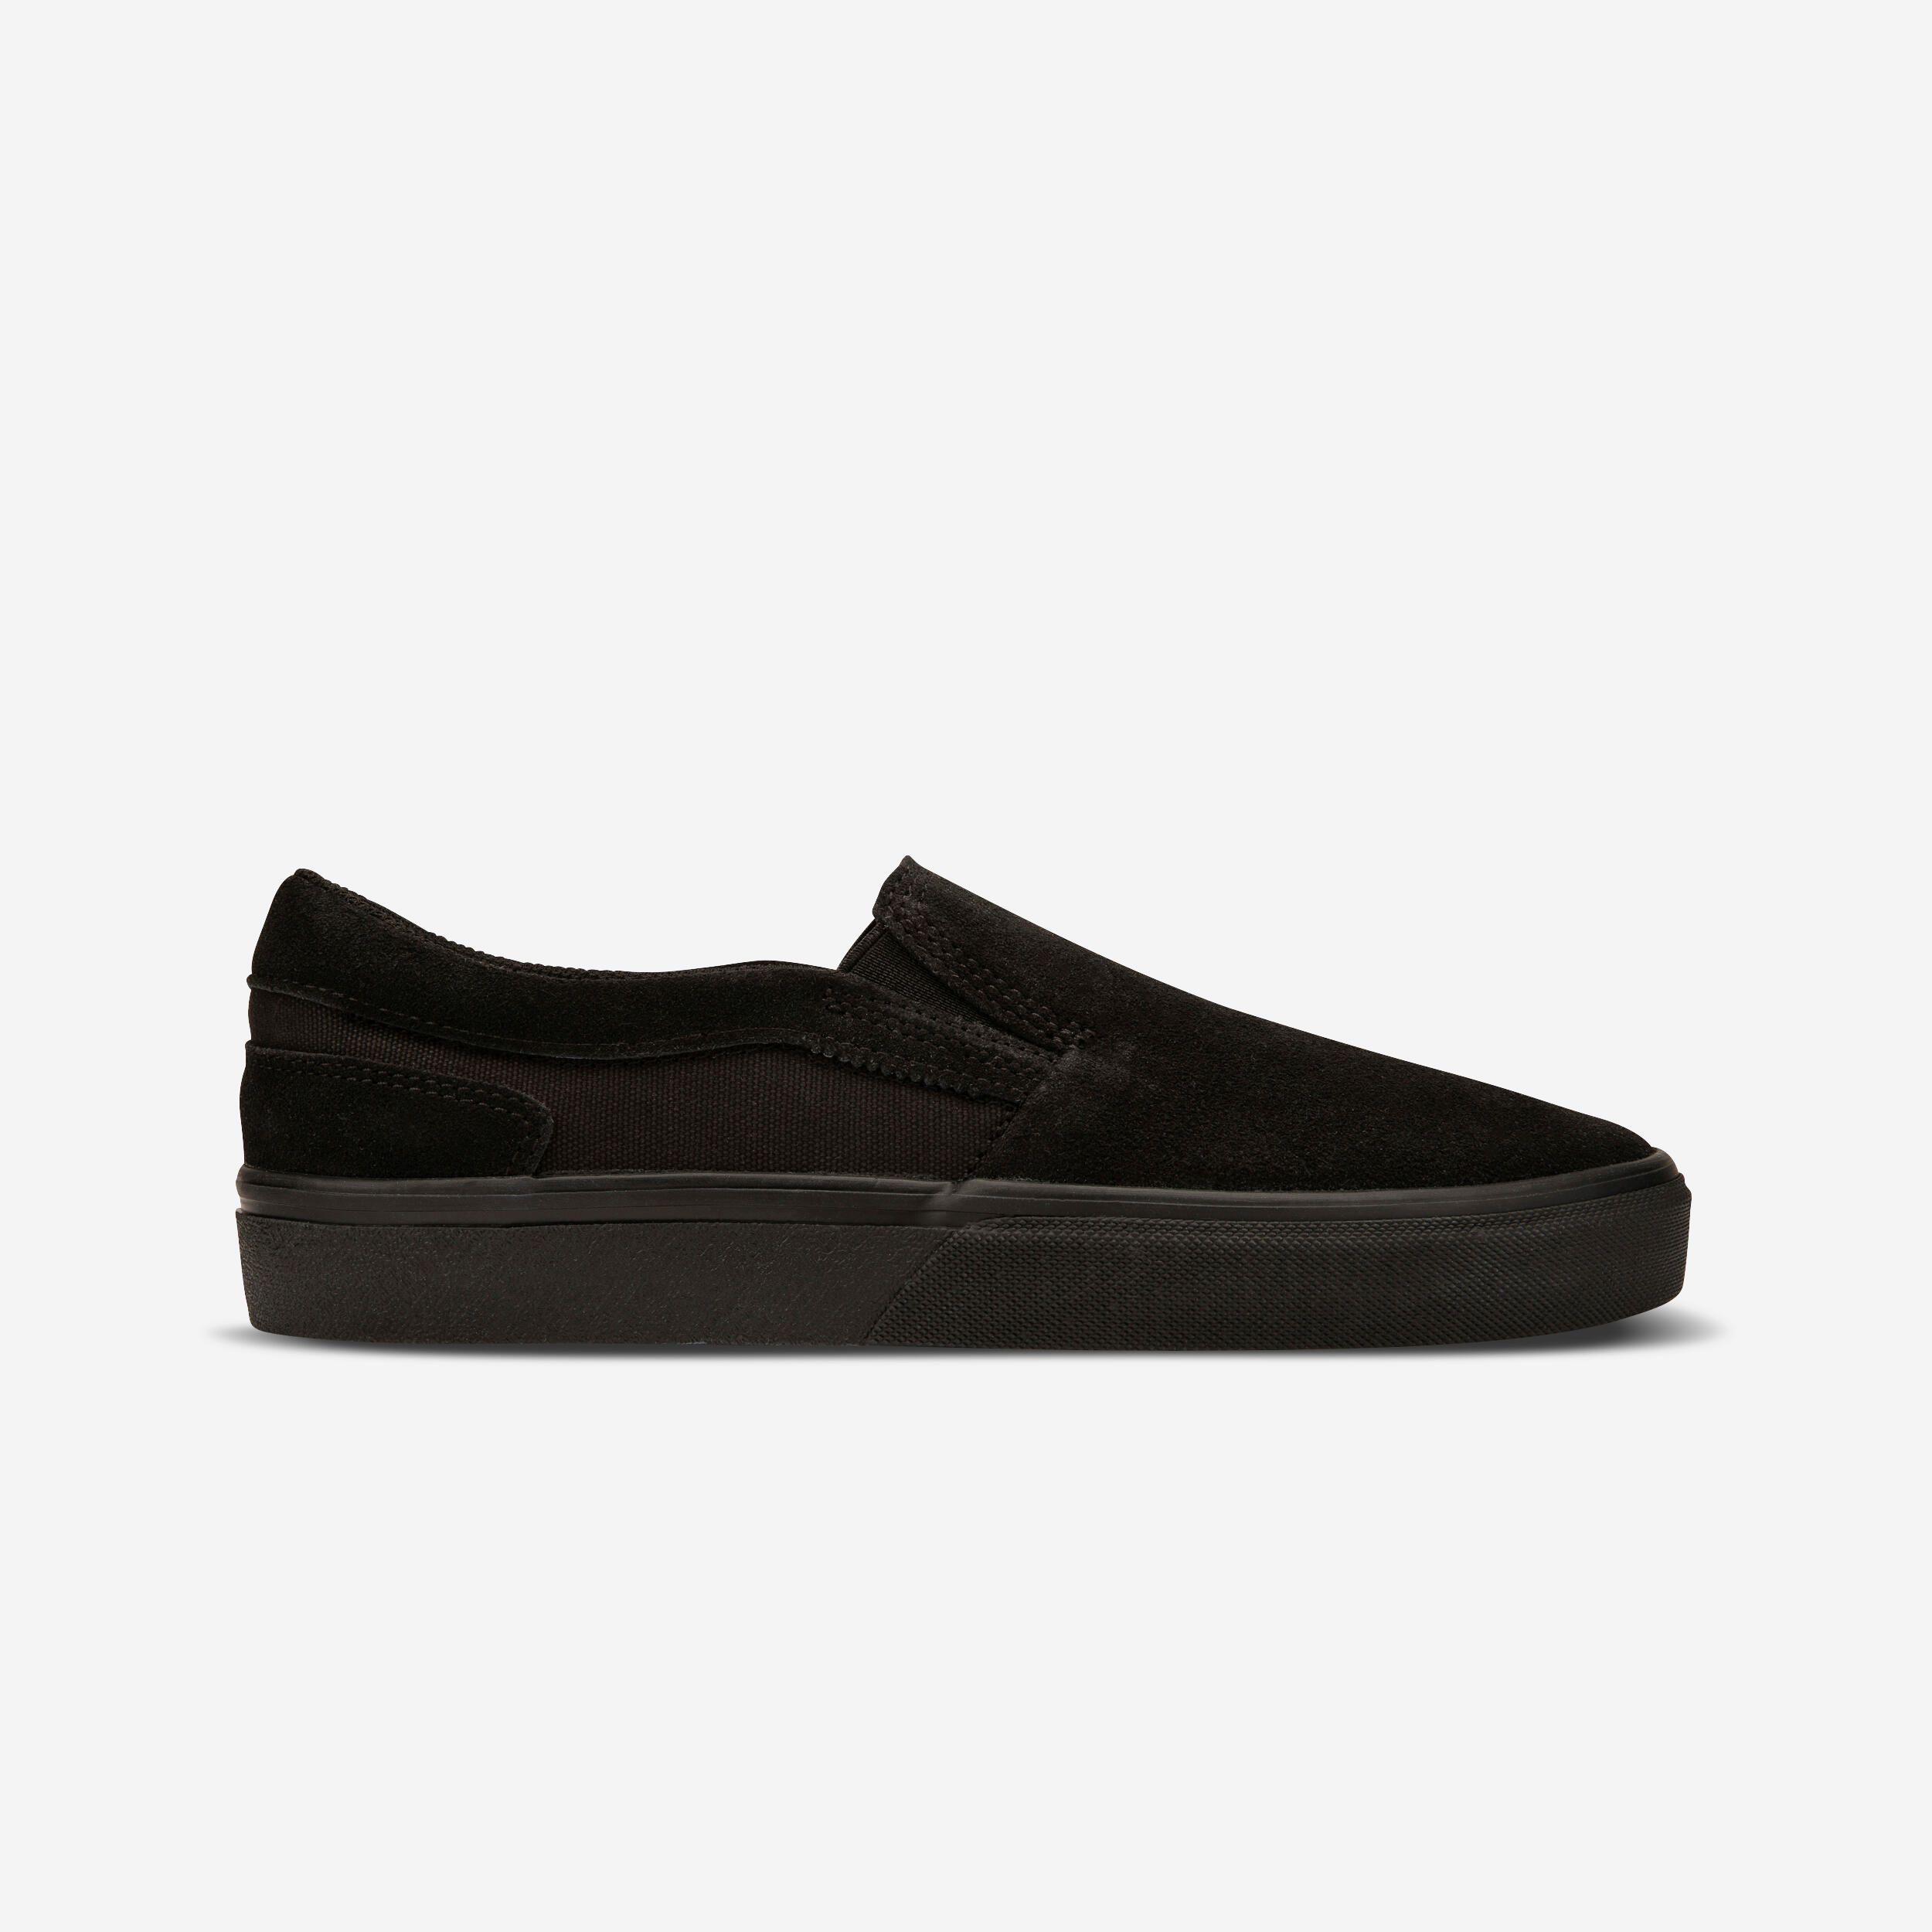 Adult Low-Top Slip-On Skate Shoes Without Laces Vulca 500 - Black 5/14